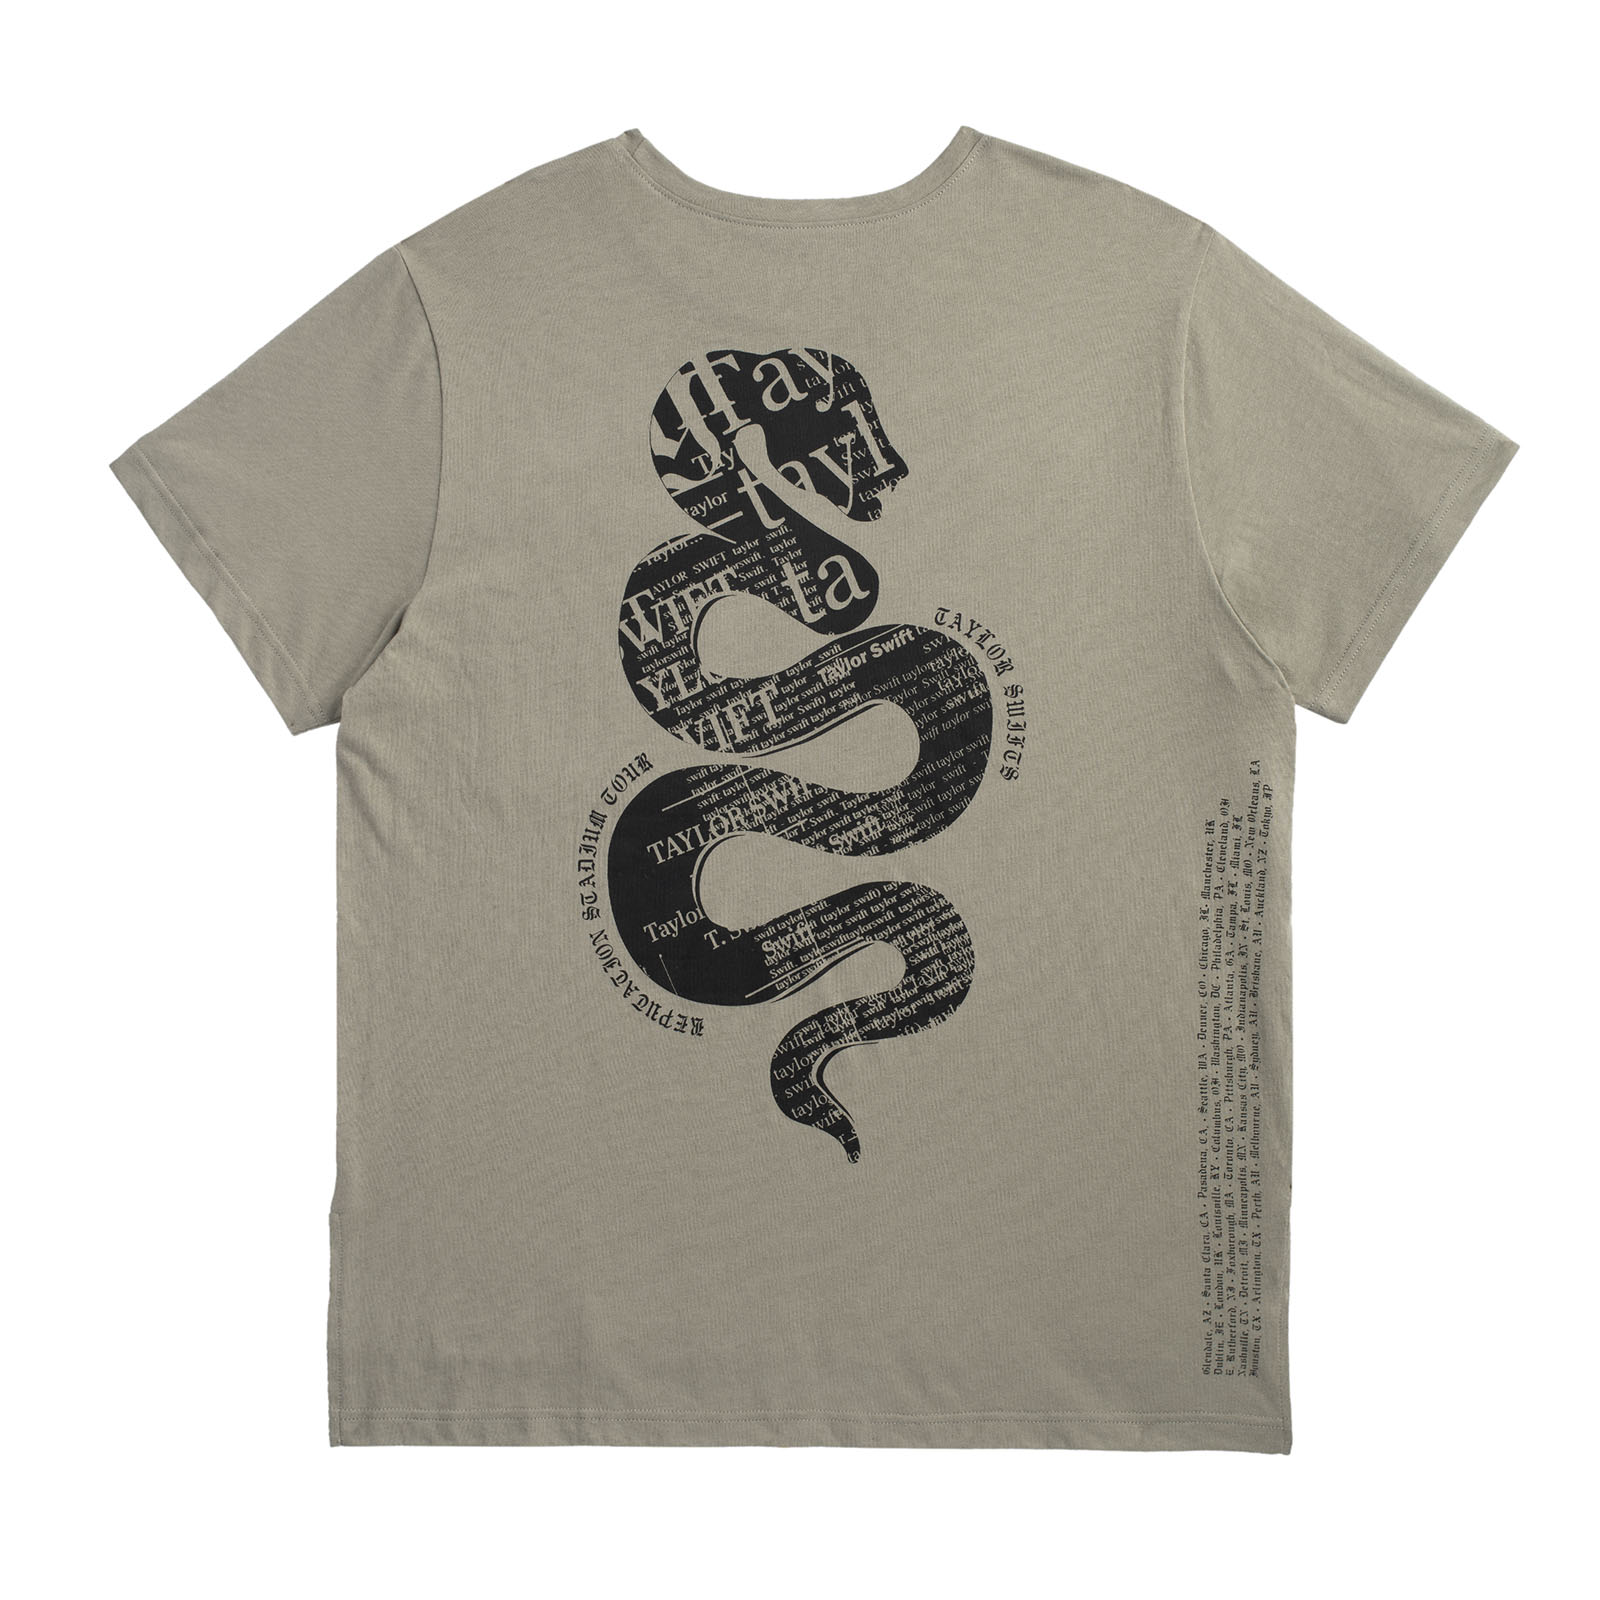 Taylor Swift Unveils Official Merchandise For Her 'Reputation' Stadium Tour | Fashion ...